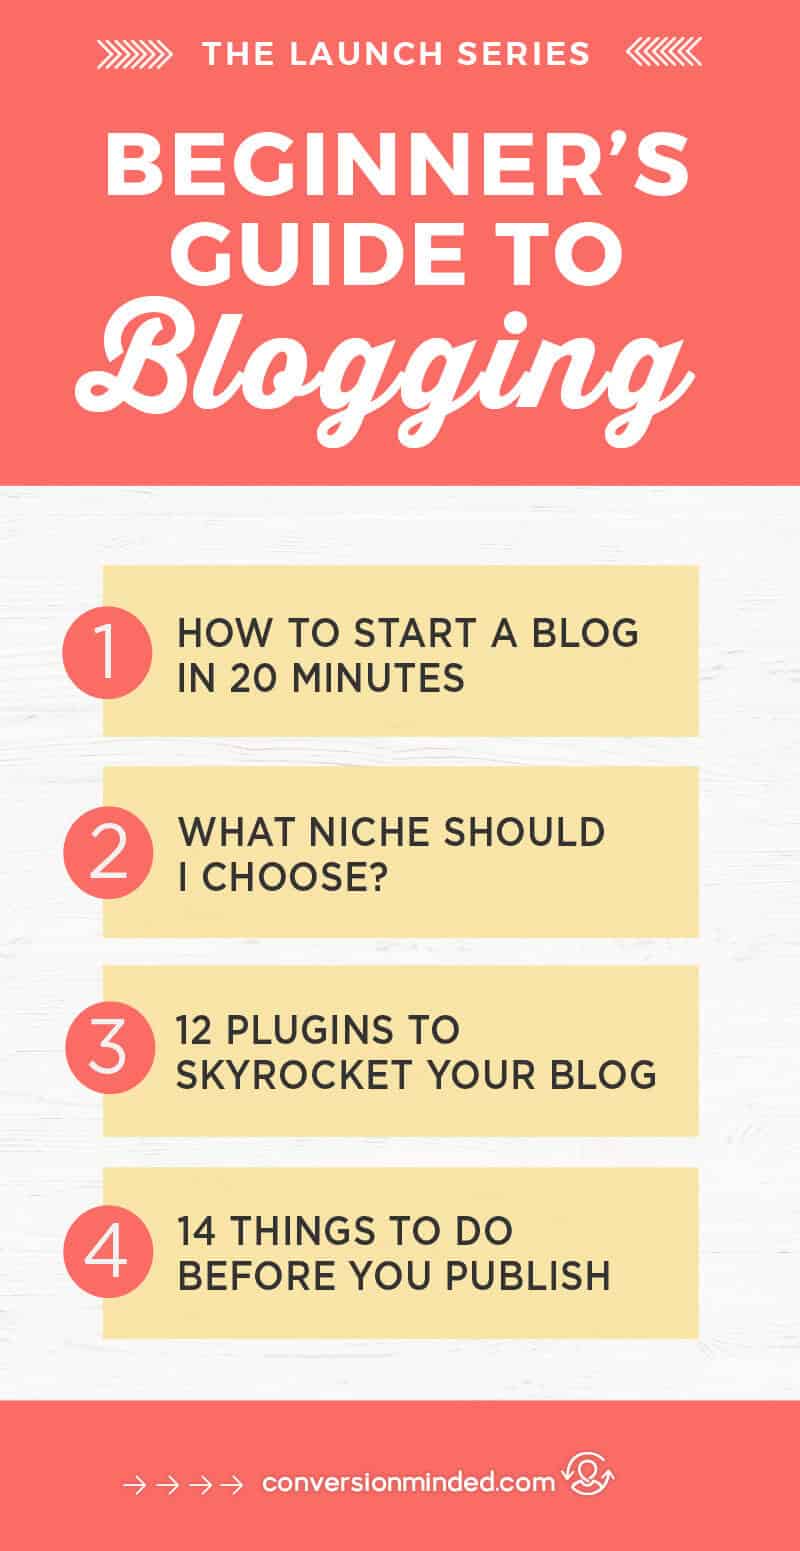 Beginner's Guide to Blogging: Here's how to use WordPress to create a site. You can do it in just 20 minutes!